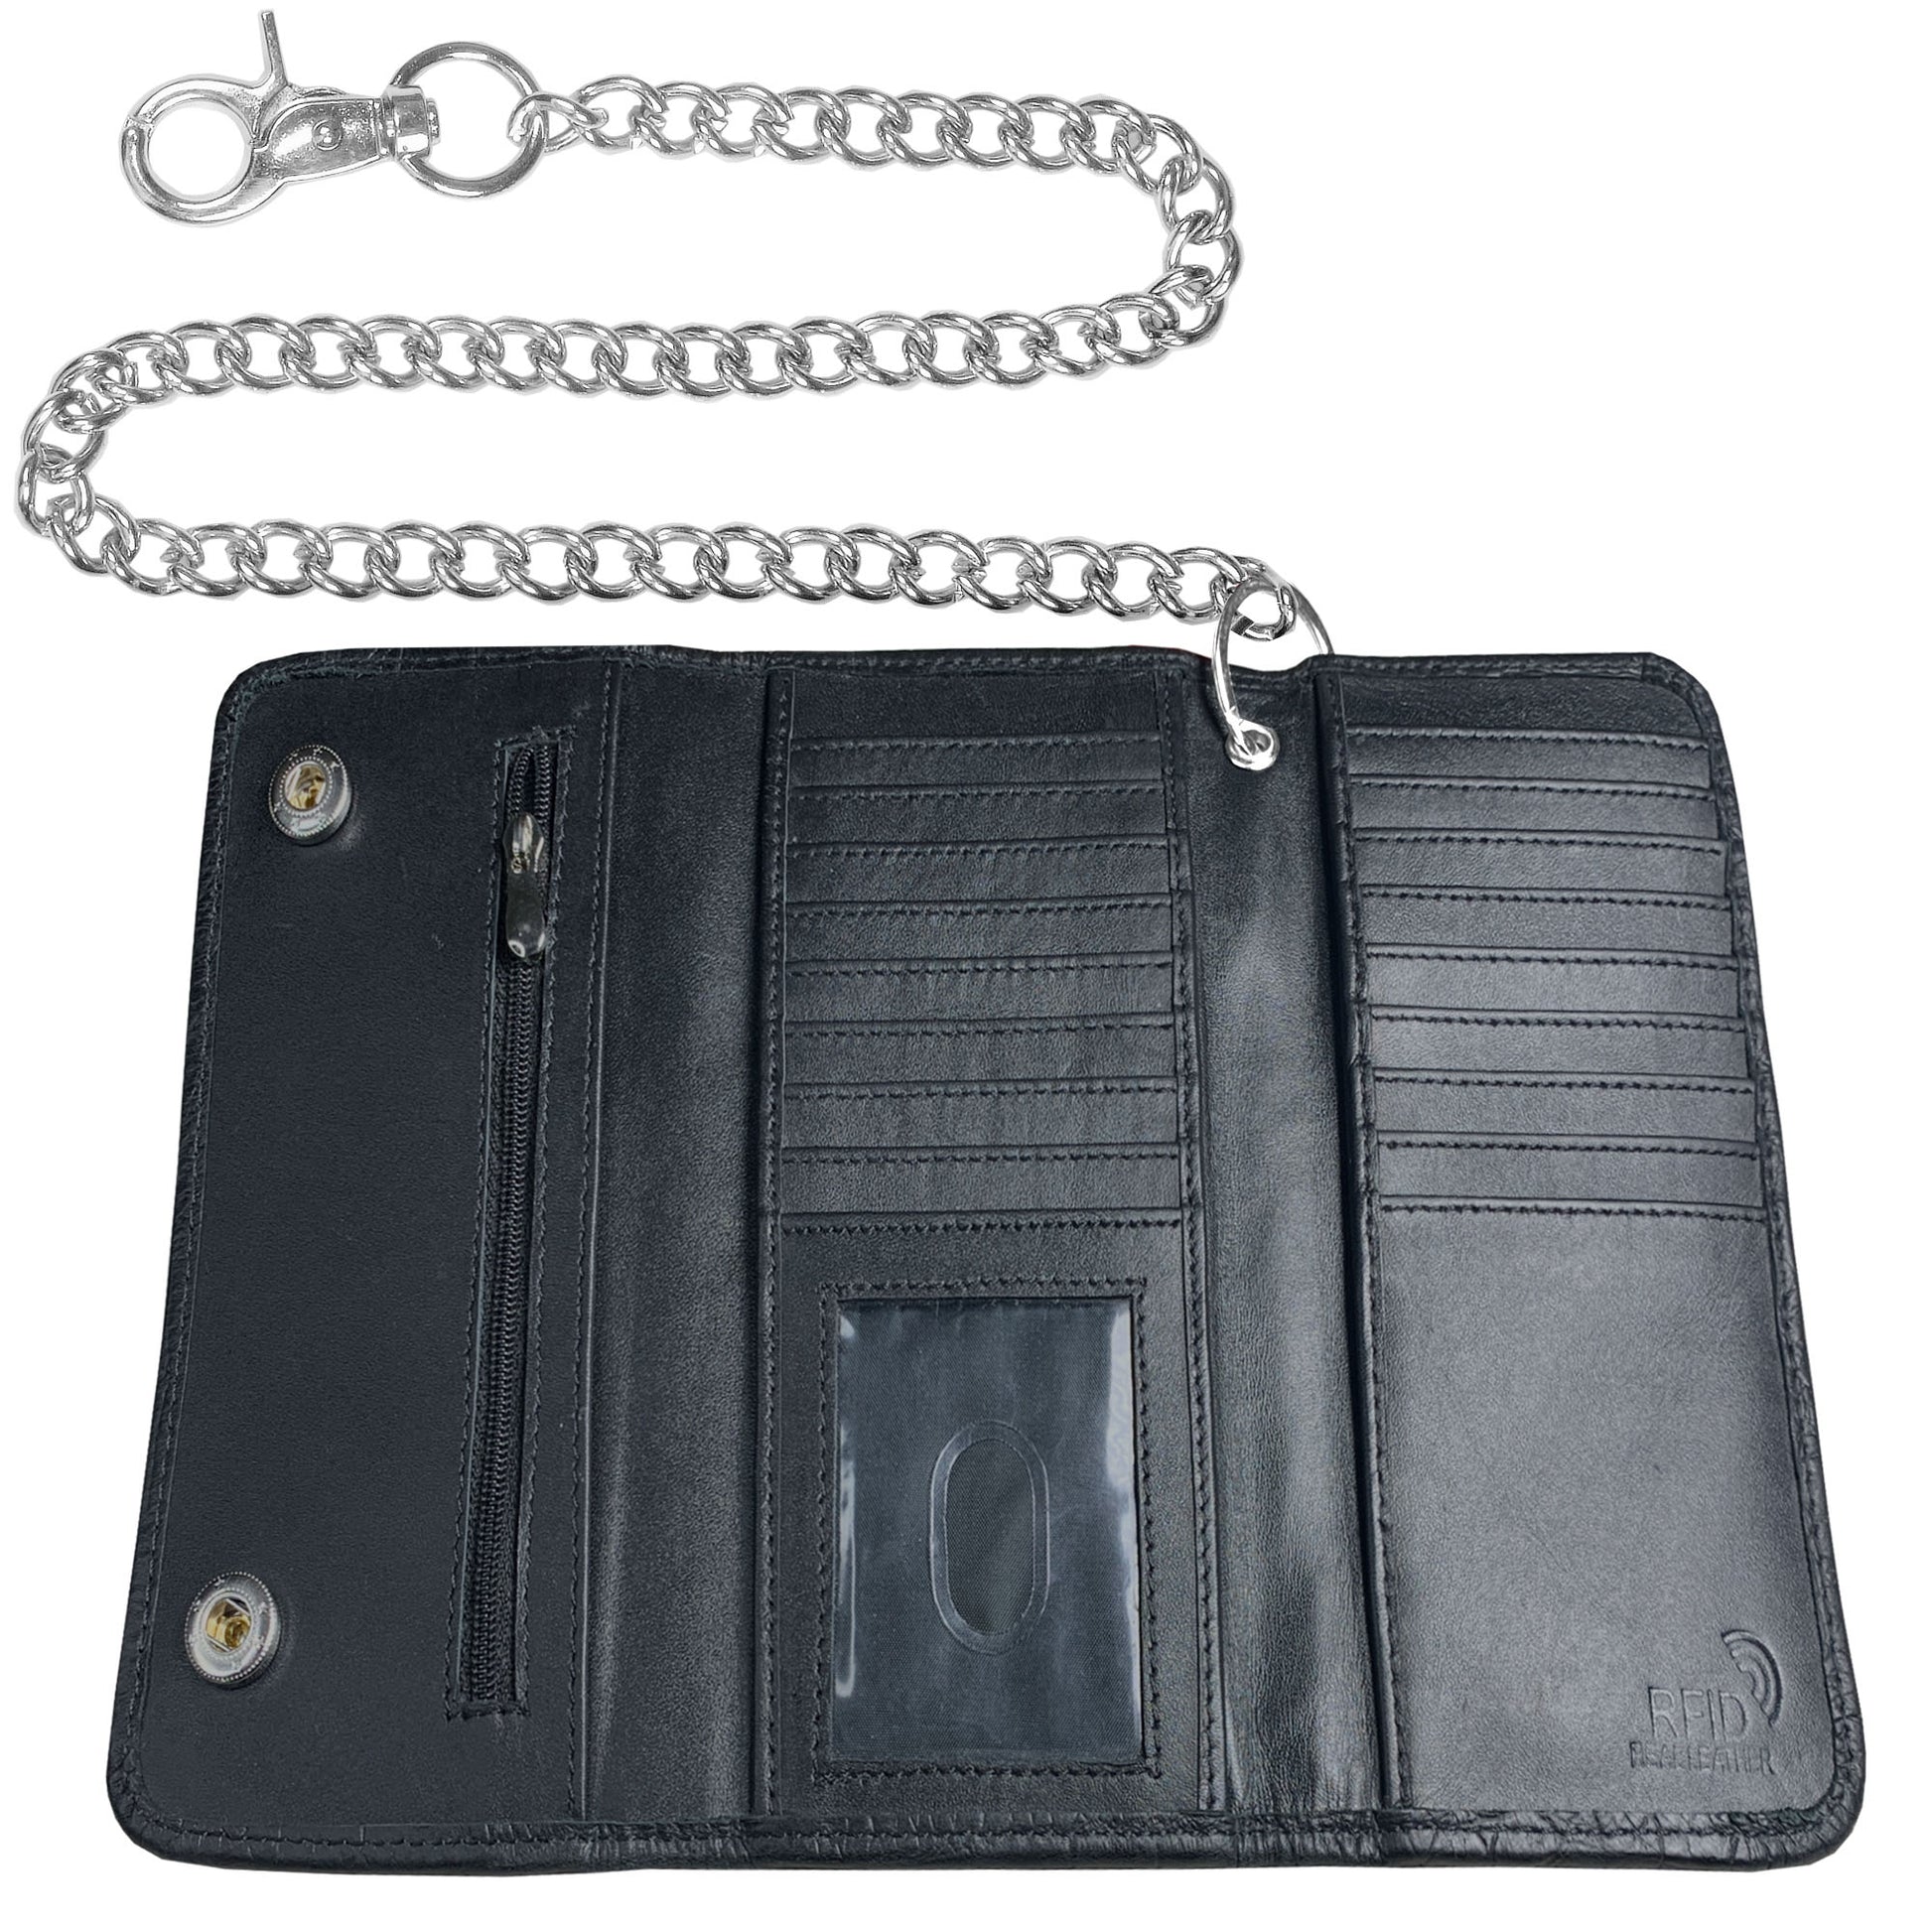 Wallet on a Chain Wallets For Women